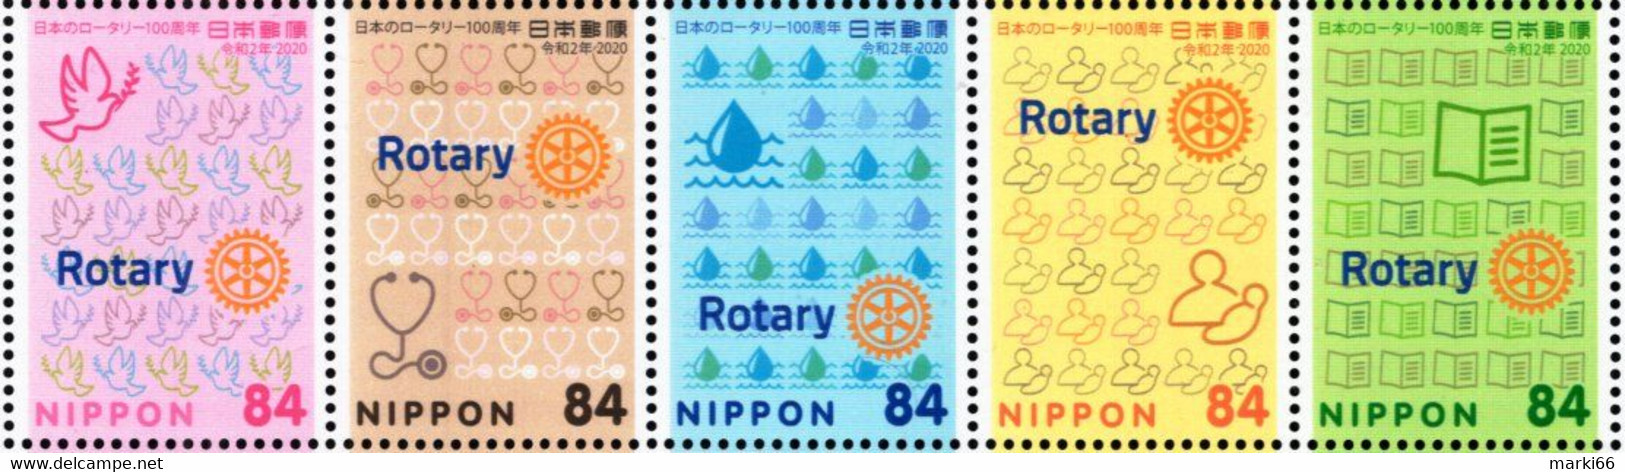 Japan - 2020 - Centenary Of Rotary Japan - Mint Stamp Set - Unused Stamps